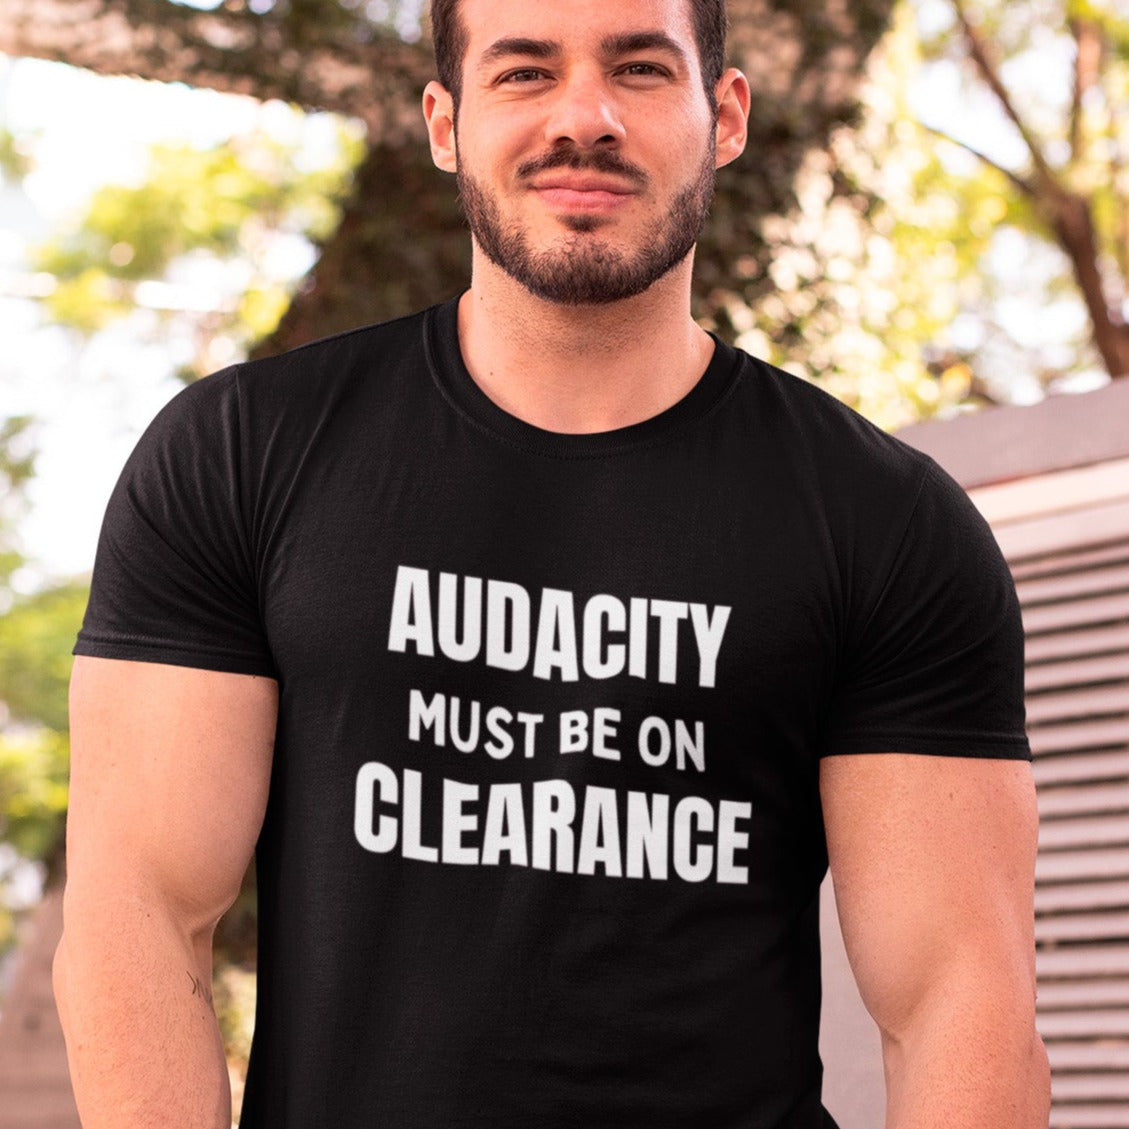 audacity-must-be-on-clearance-black-t-shirt-unisex-funny-mockup-of-a-muscled-man-smirking-at-the-camera